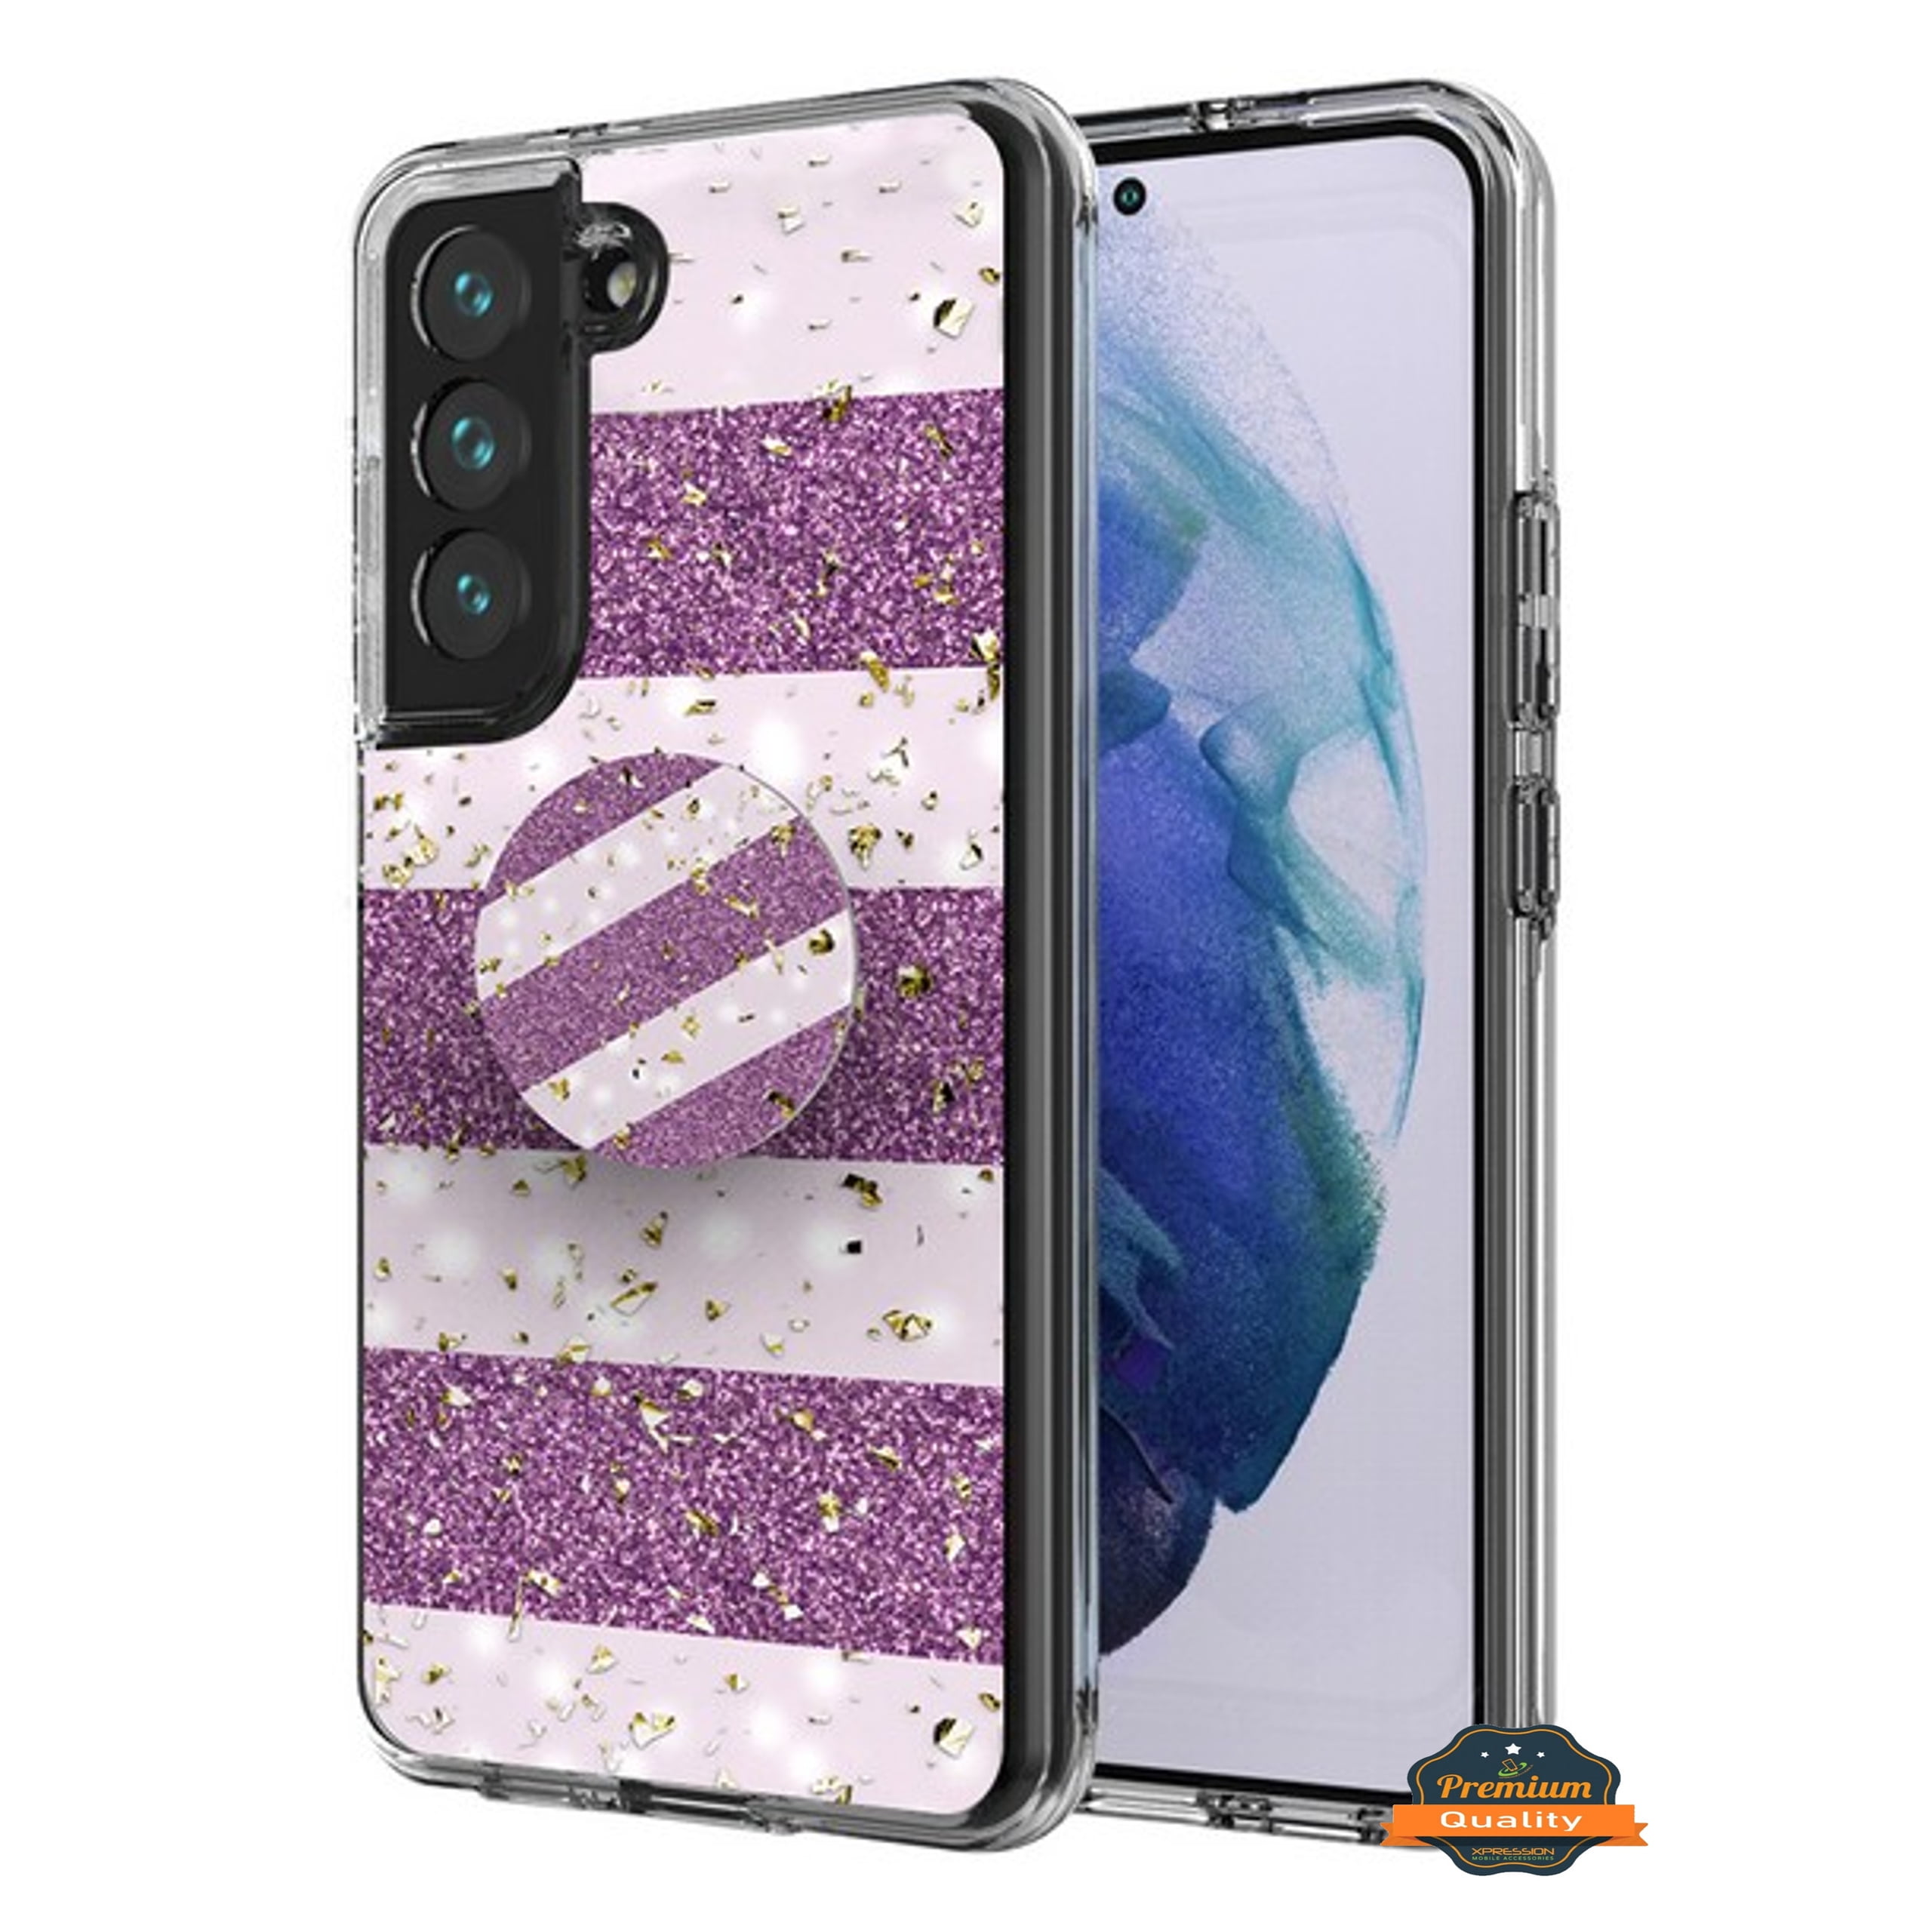 For Samsung Galaxy 5G Elegant Pattern Design Glitter Hybrid with Ring Stand Pop Up Holder Kickstand Phone Case Cover by Xpression - Purple White - Walmart.com